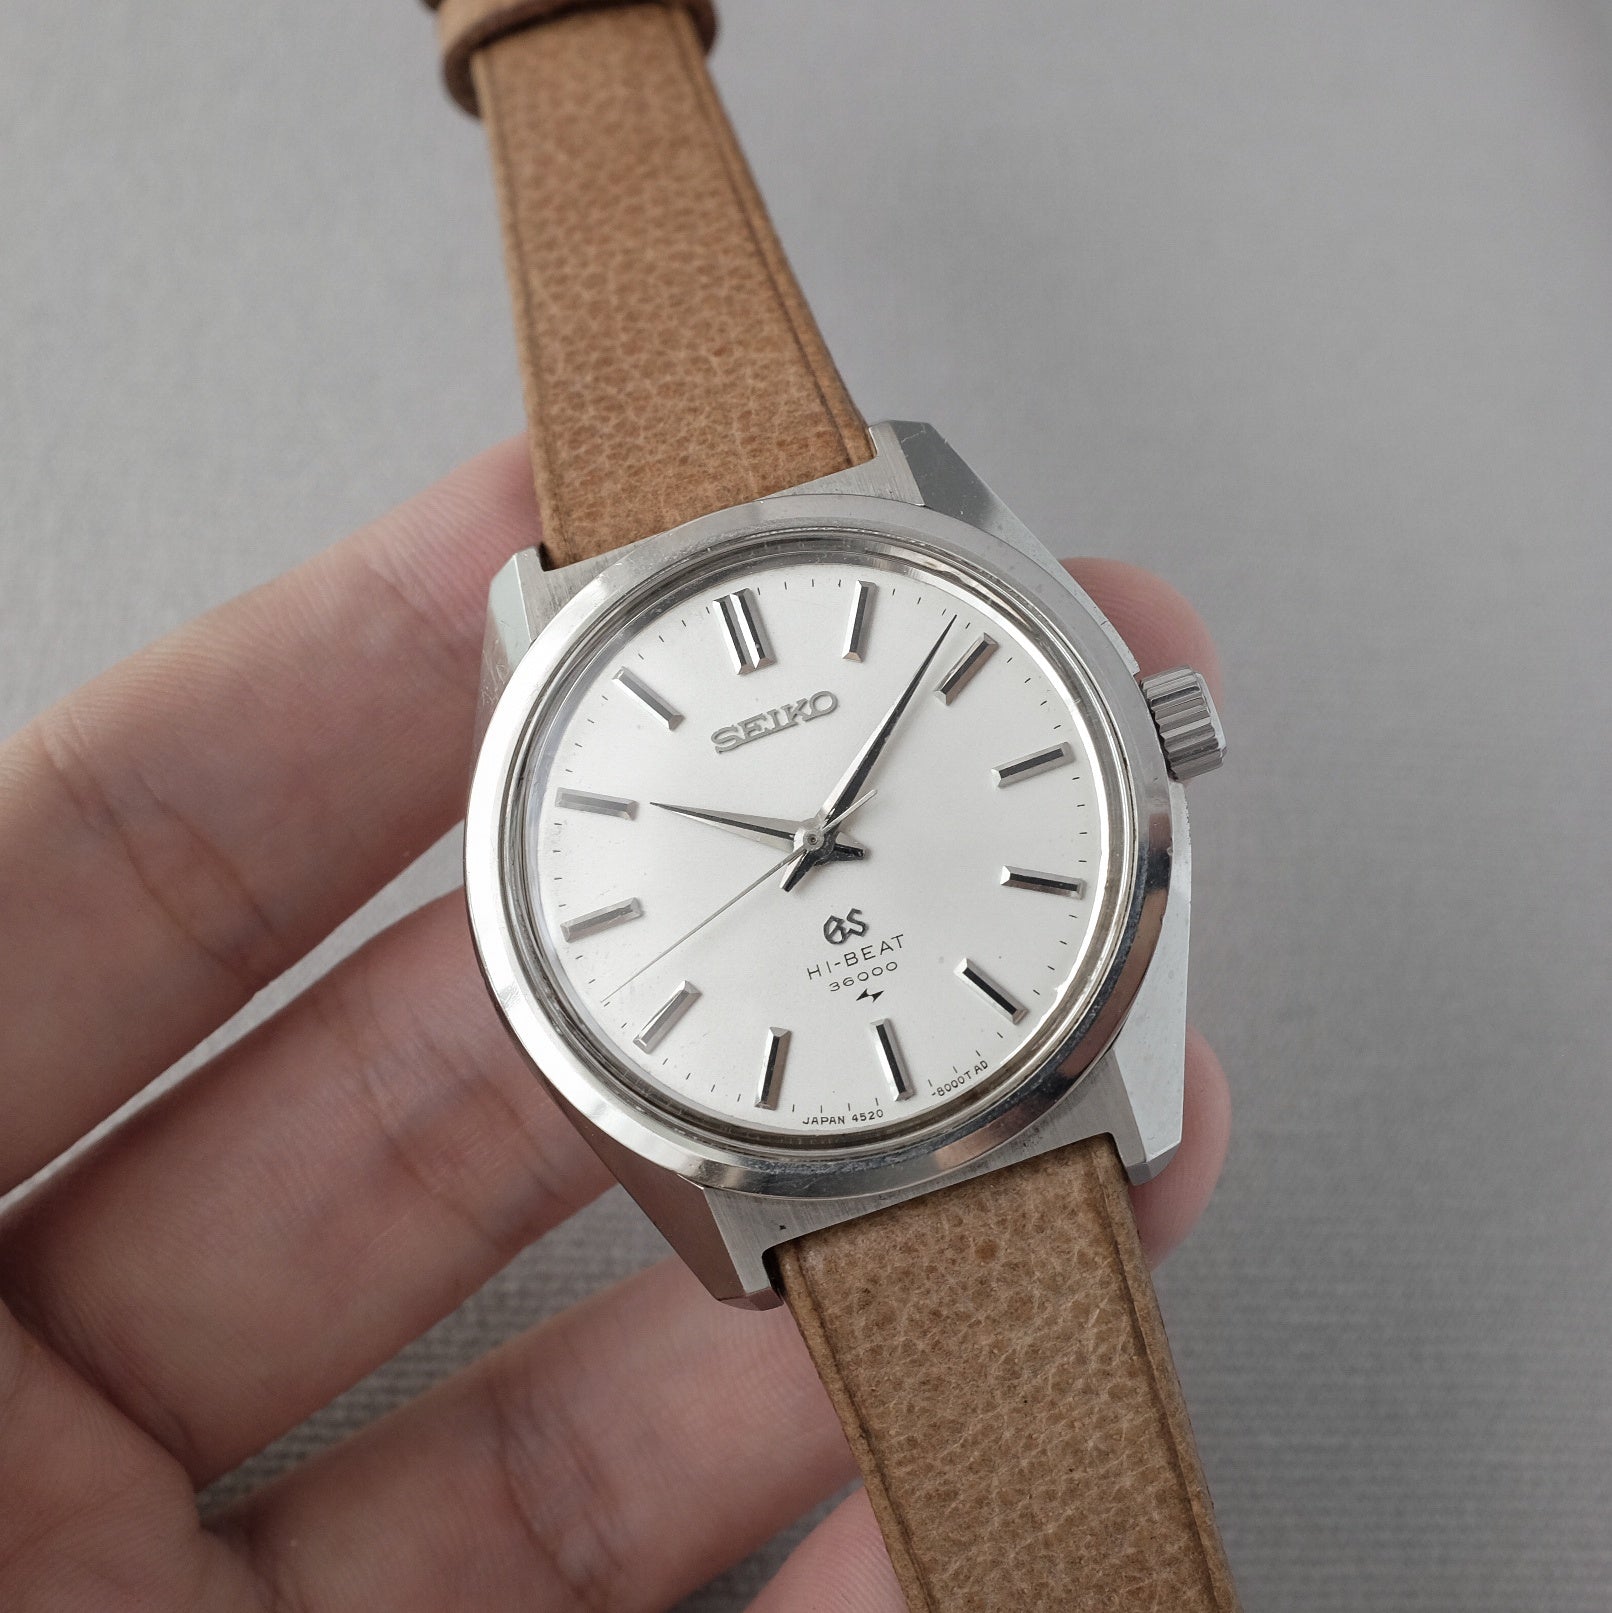 Grand Seiko 4520-8000 from 1968